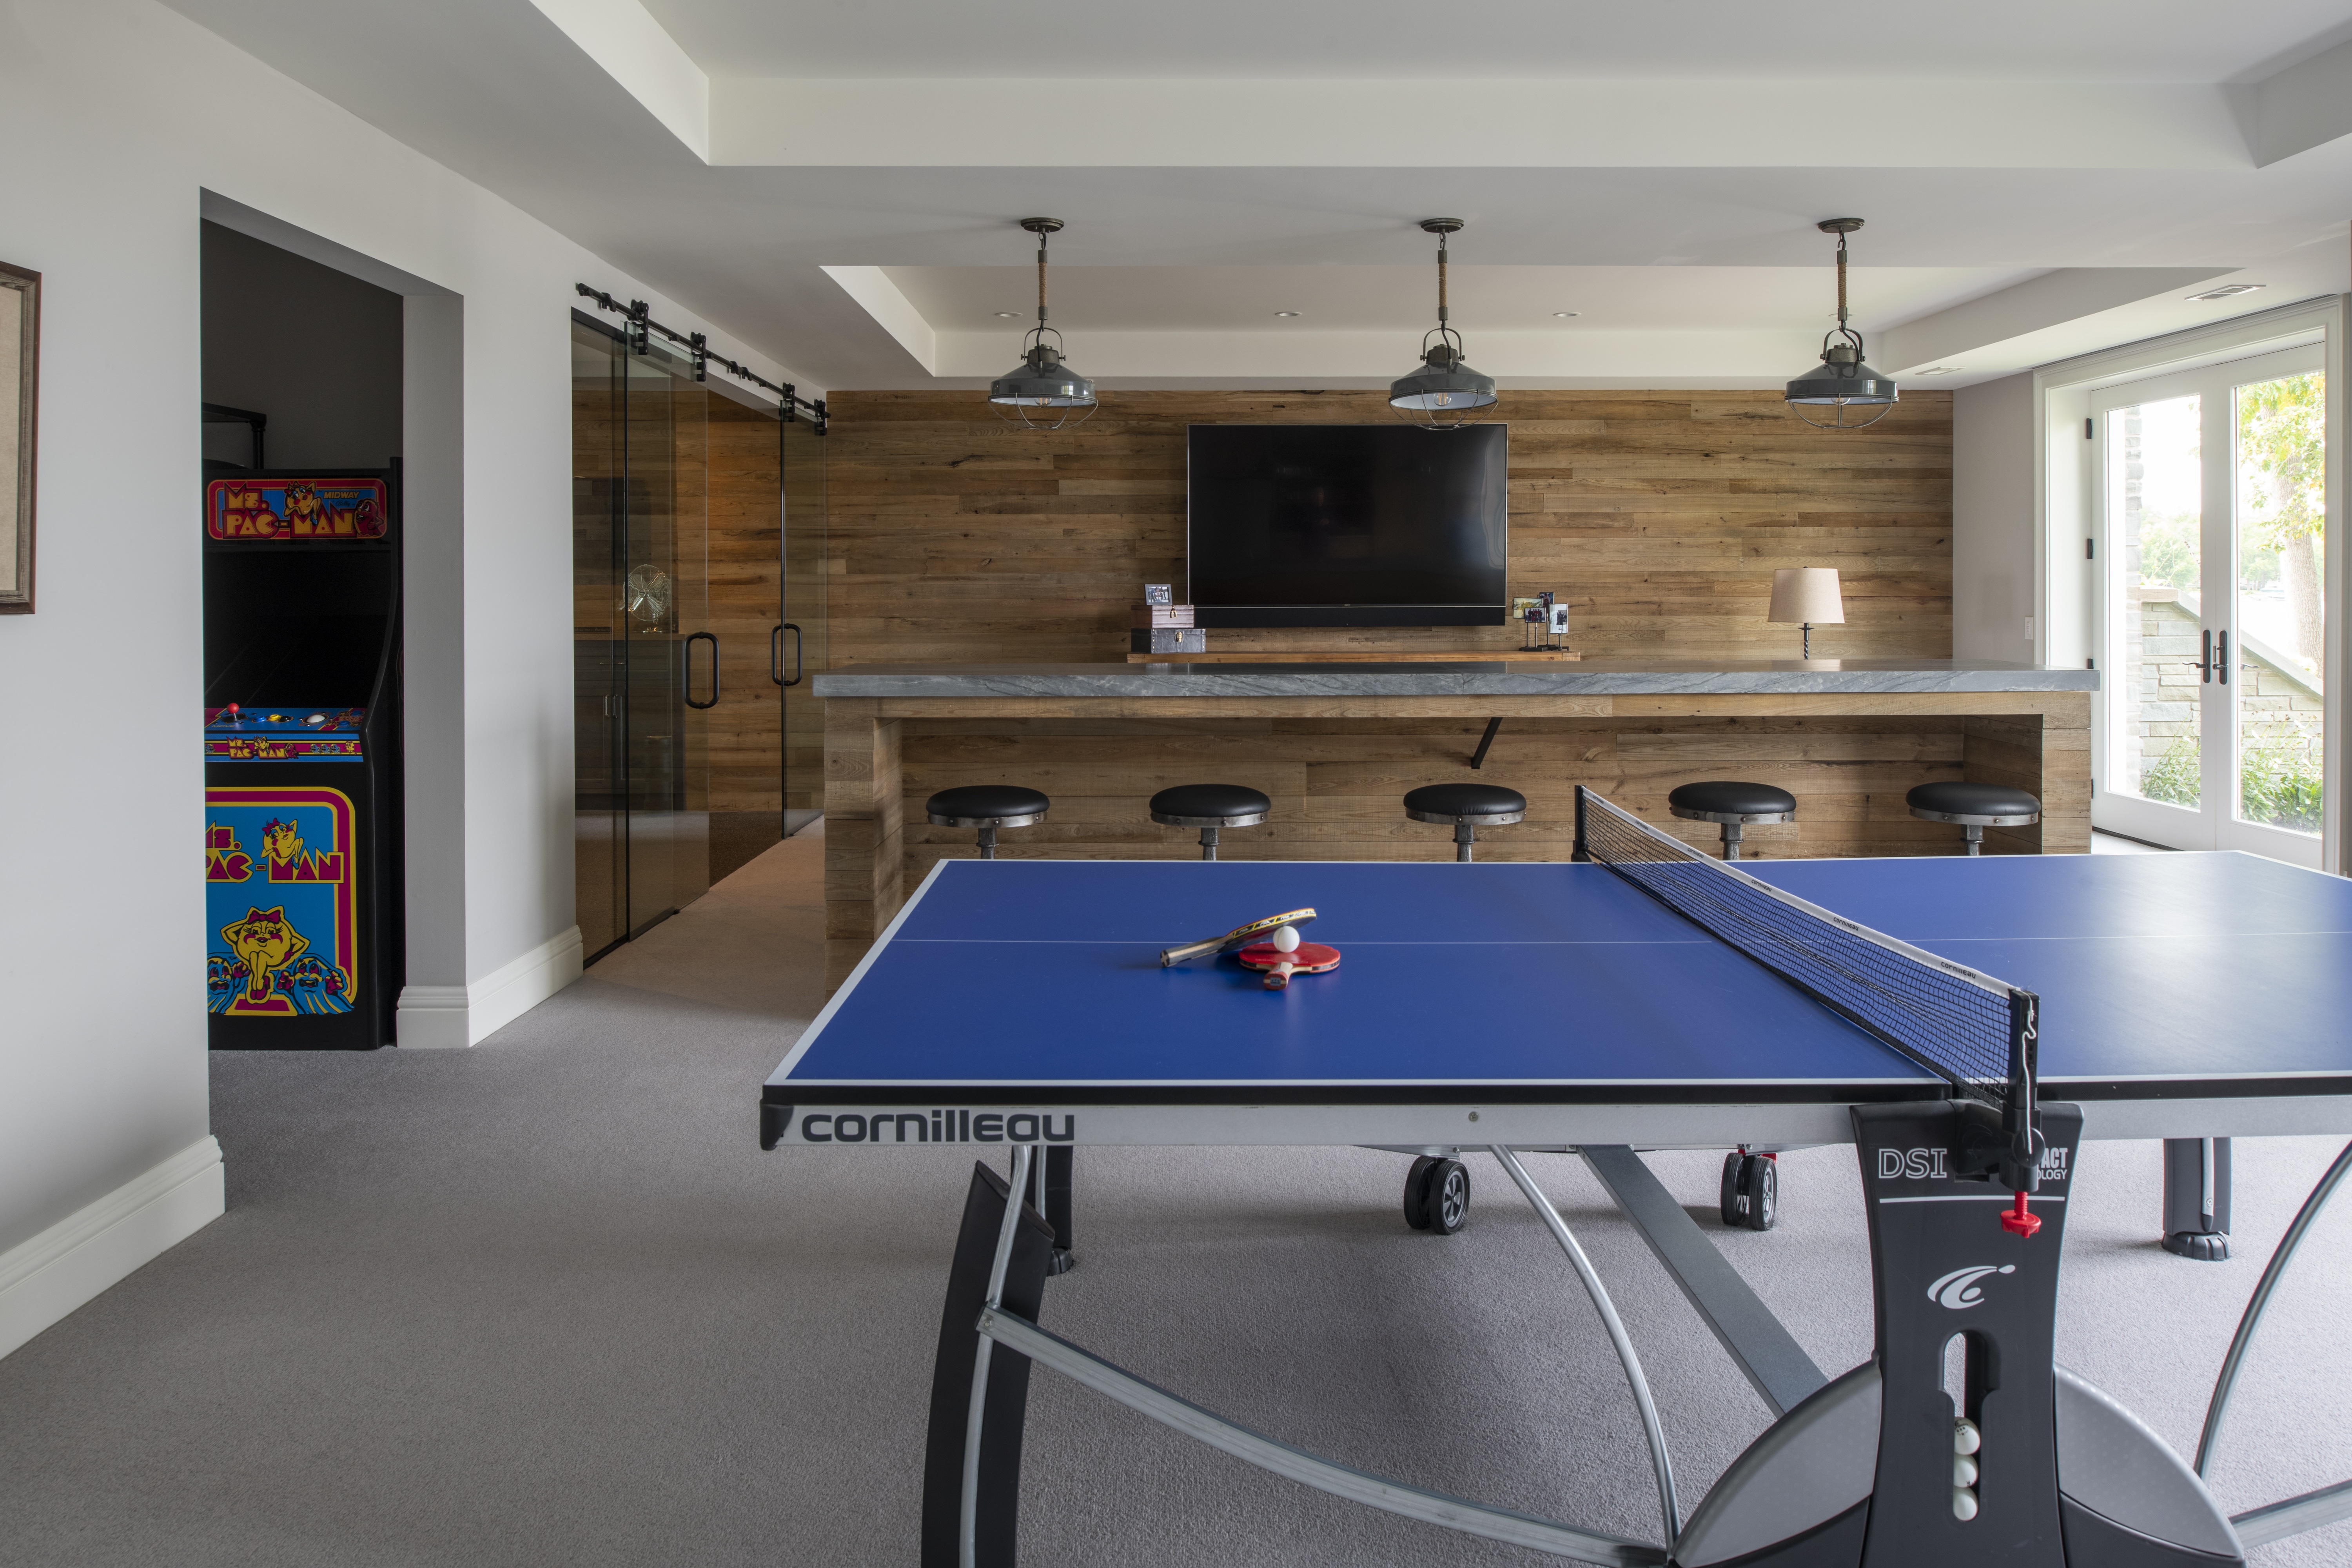 A rec room in a Gordon James custom luxury home features a ping pong table and mini bar.